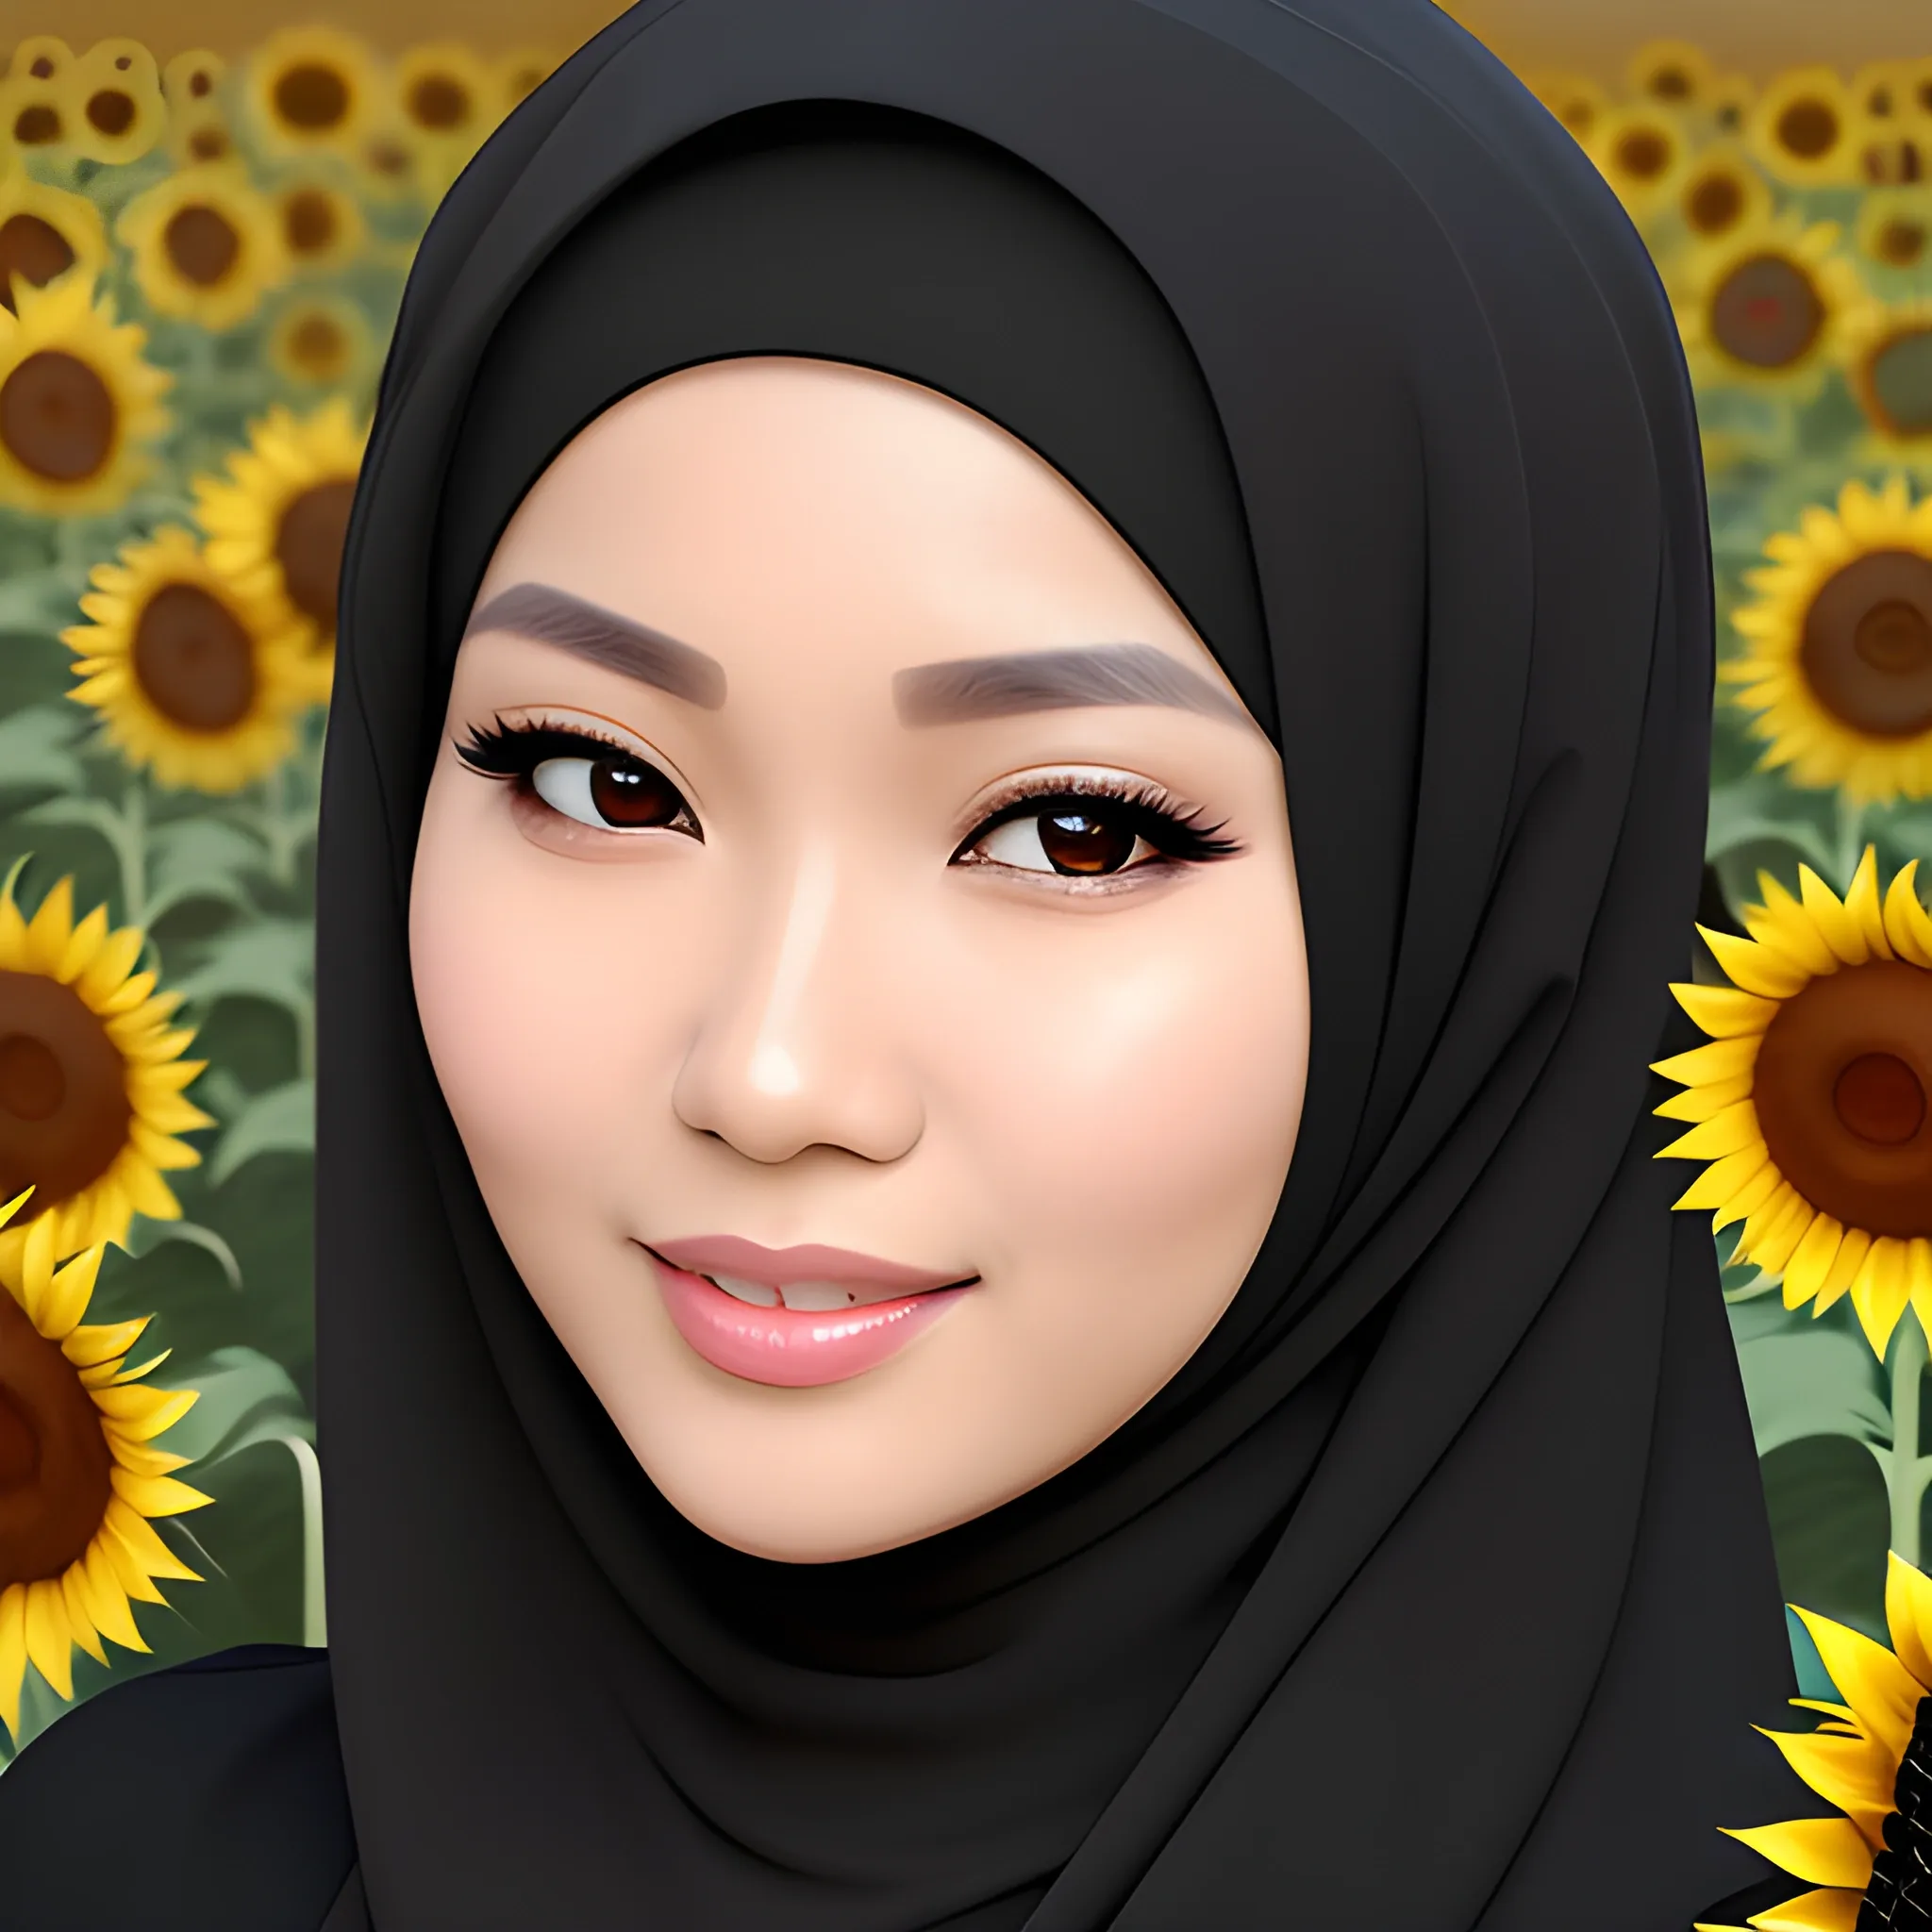 pretty women indonesian, elegant, happy, face detail, sharp nose, black eyes, wearing black hijab, white blouse casual, in the sunflowers, her eyes looking at camera, 4k